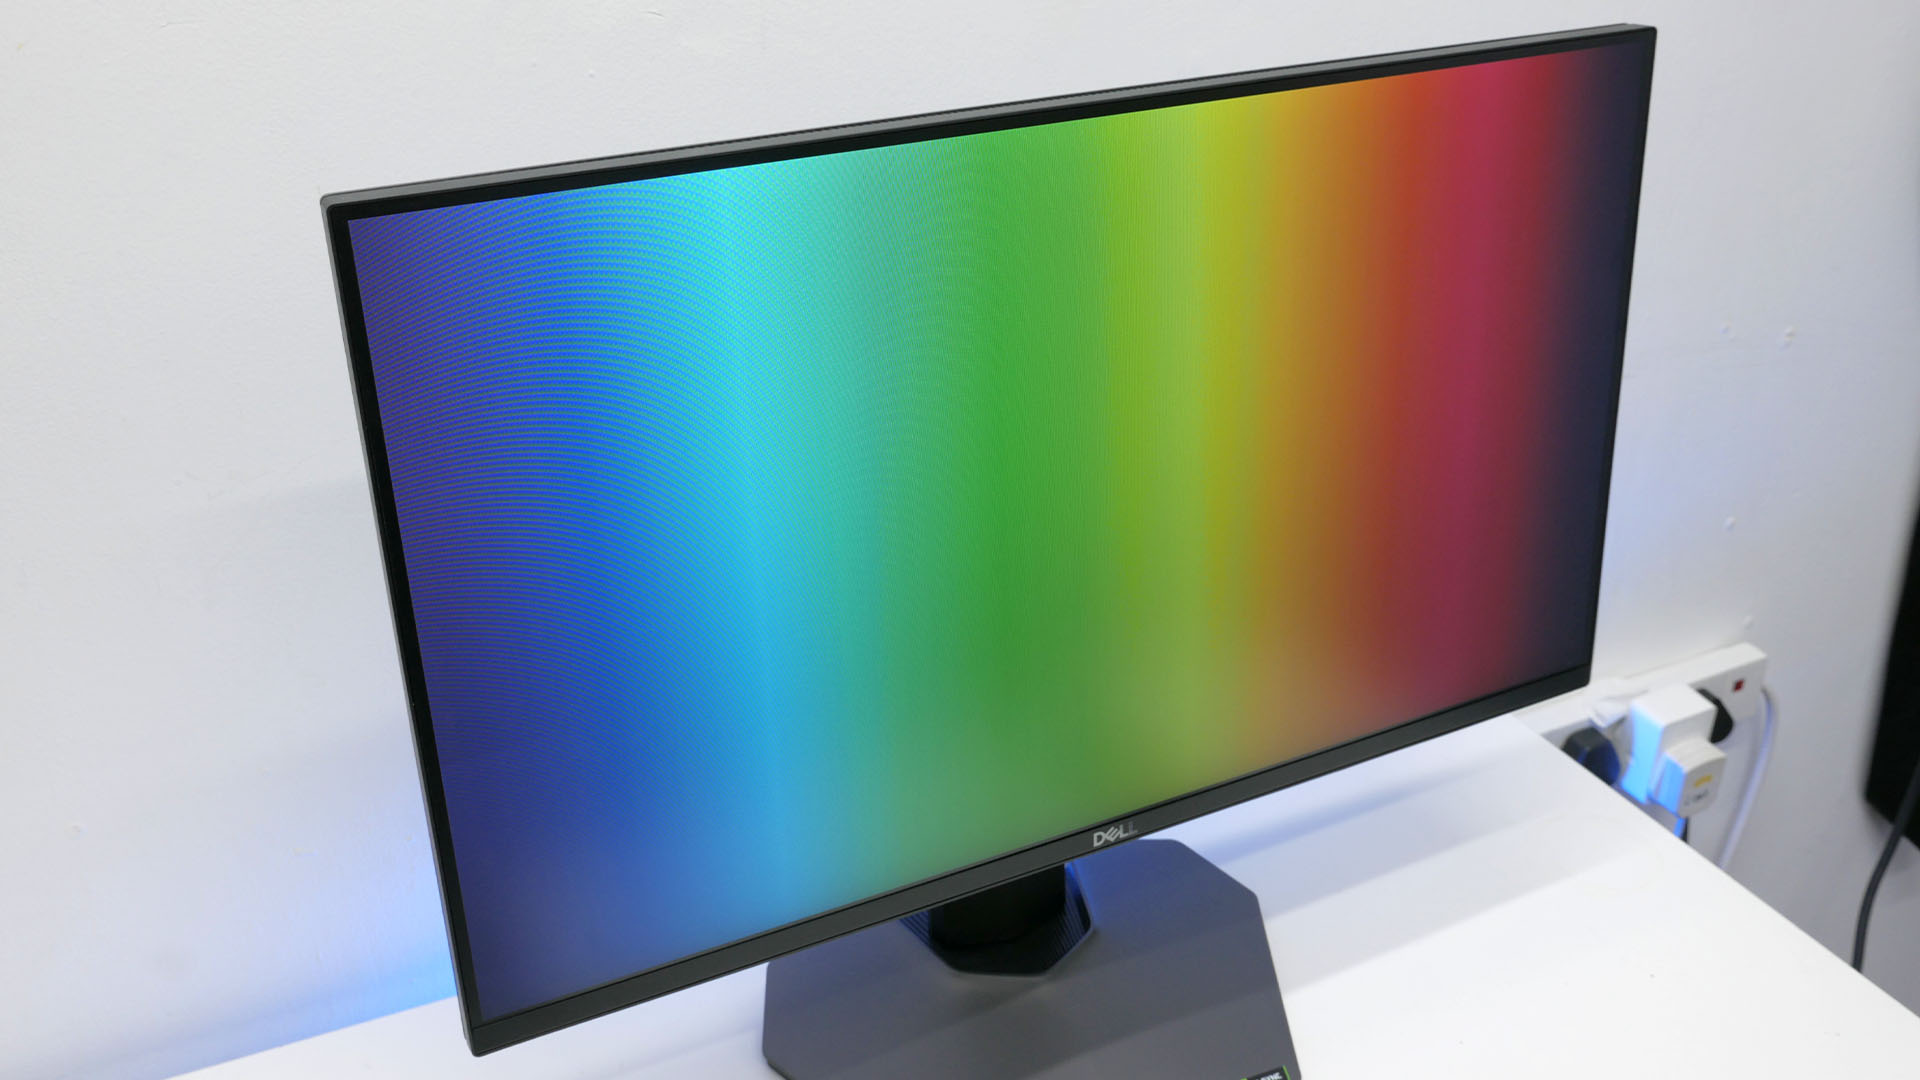 Dell G2524H review image showing the monito with a rainbow gradient on it.